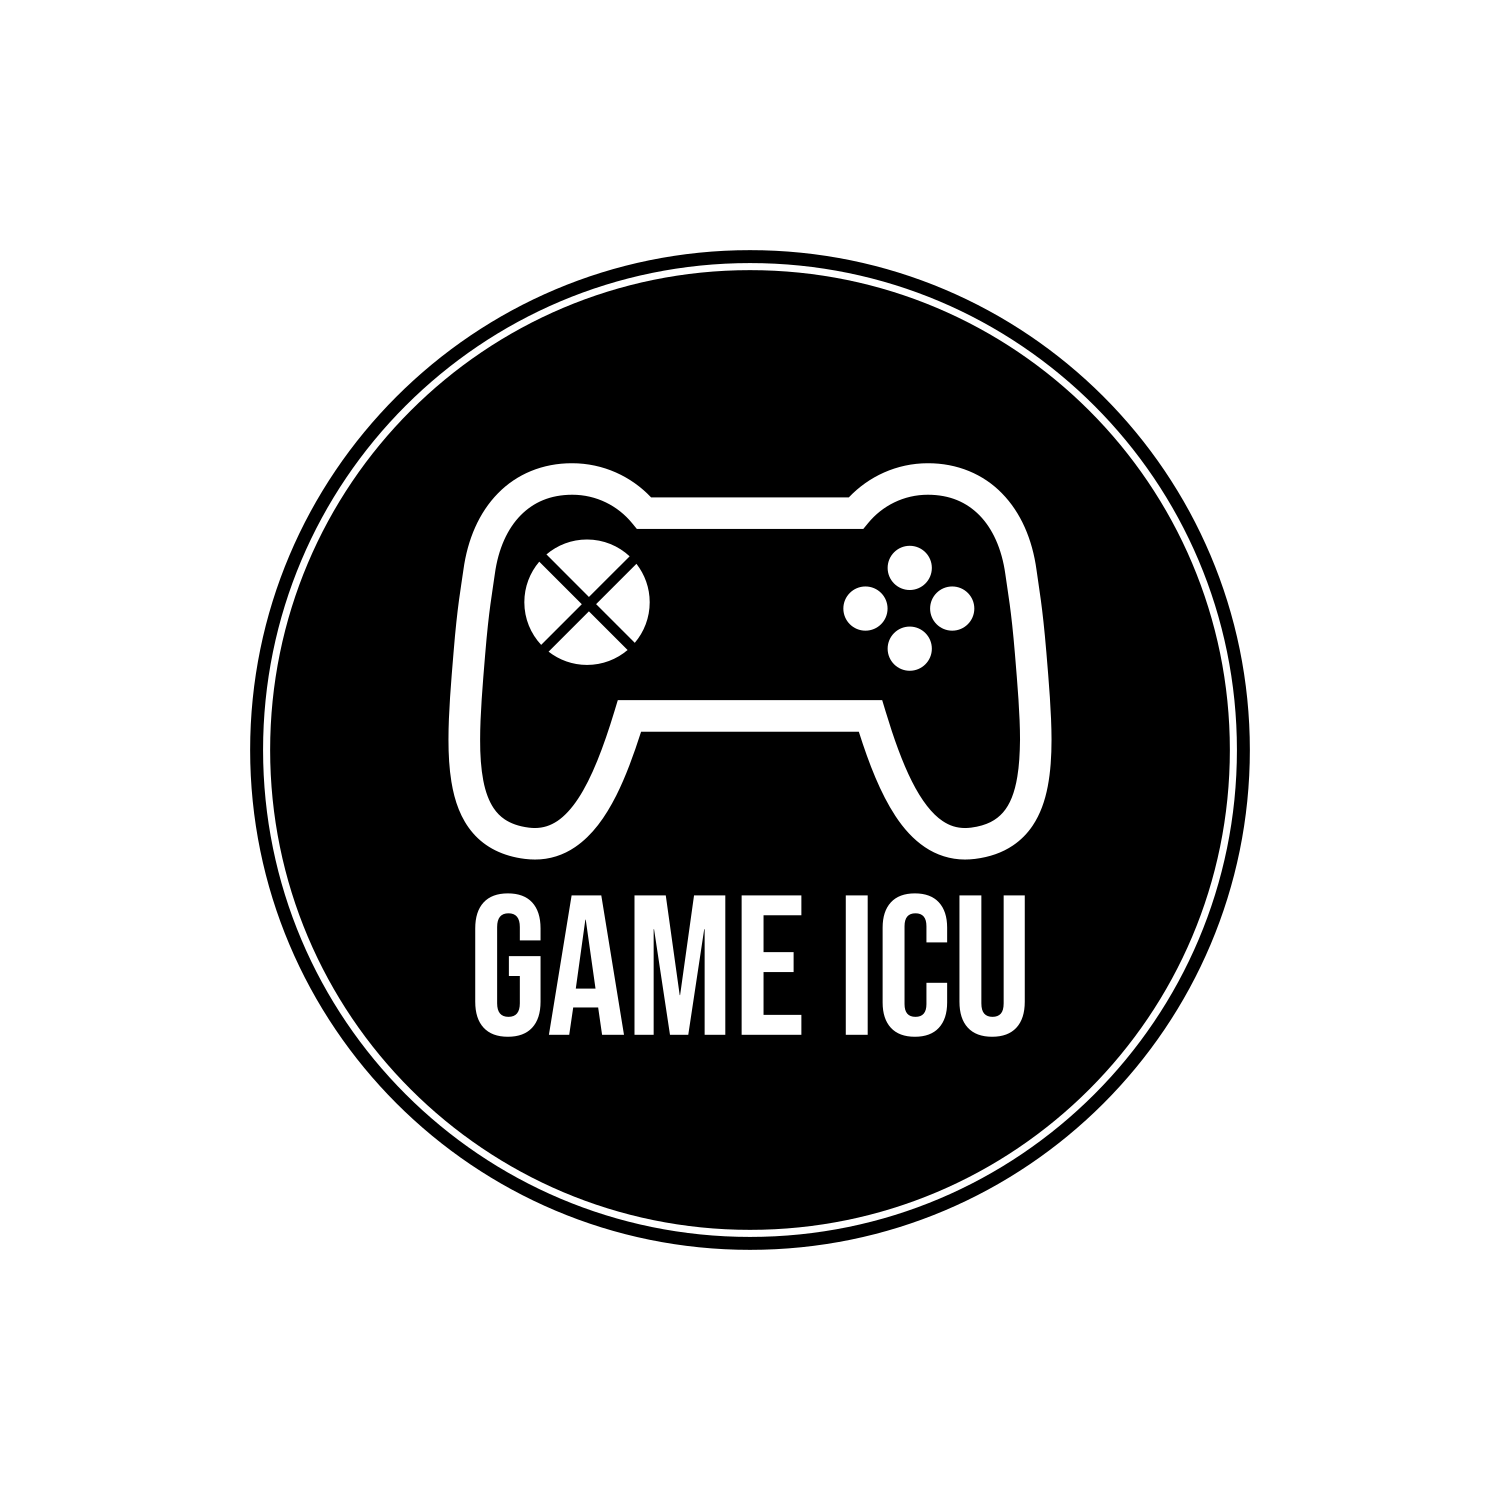 GameIcu: Experts Behind the Team